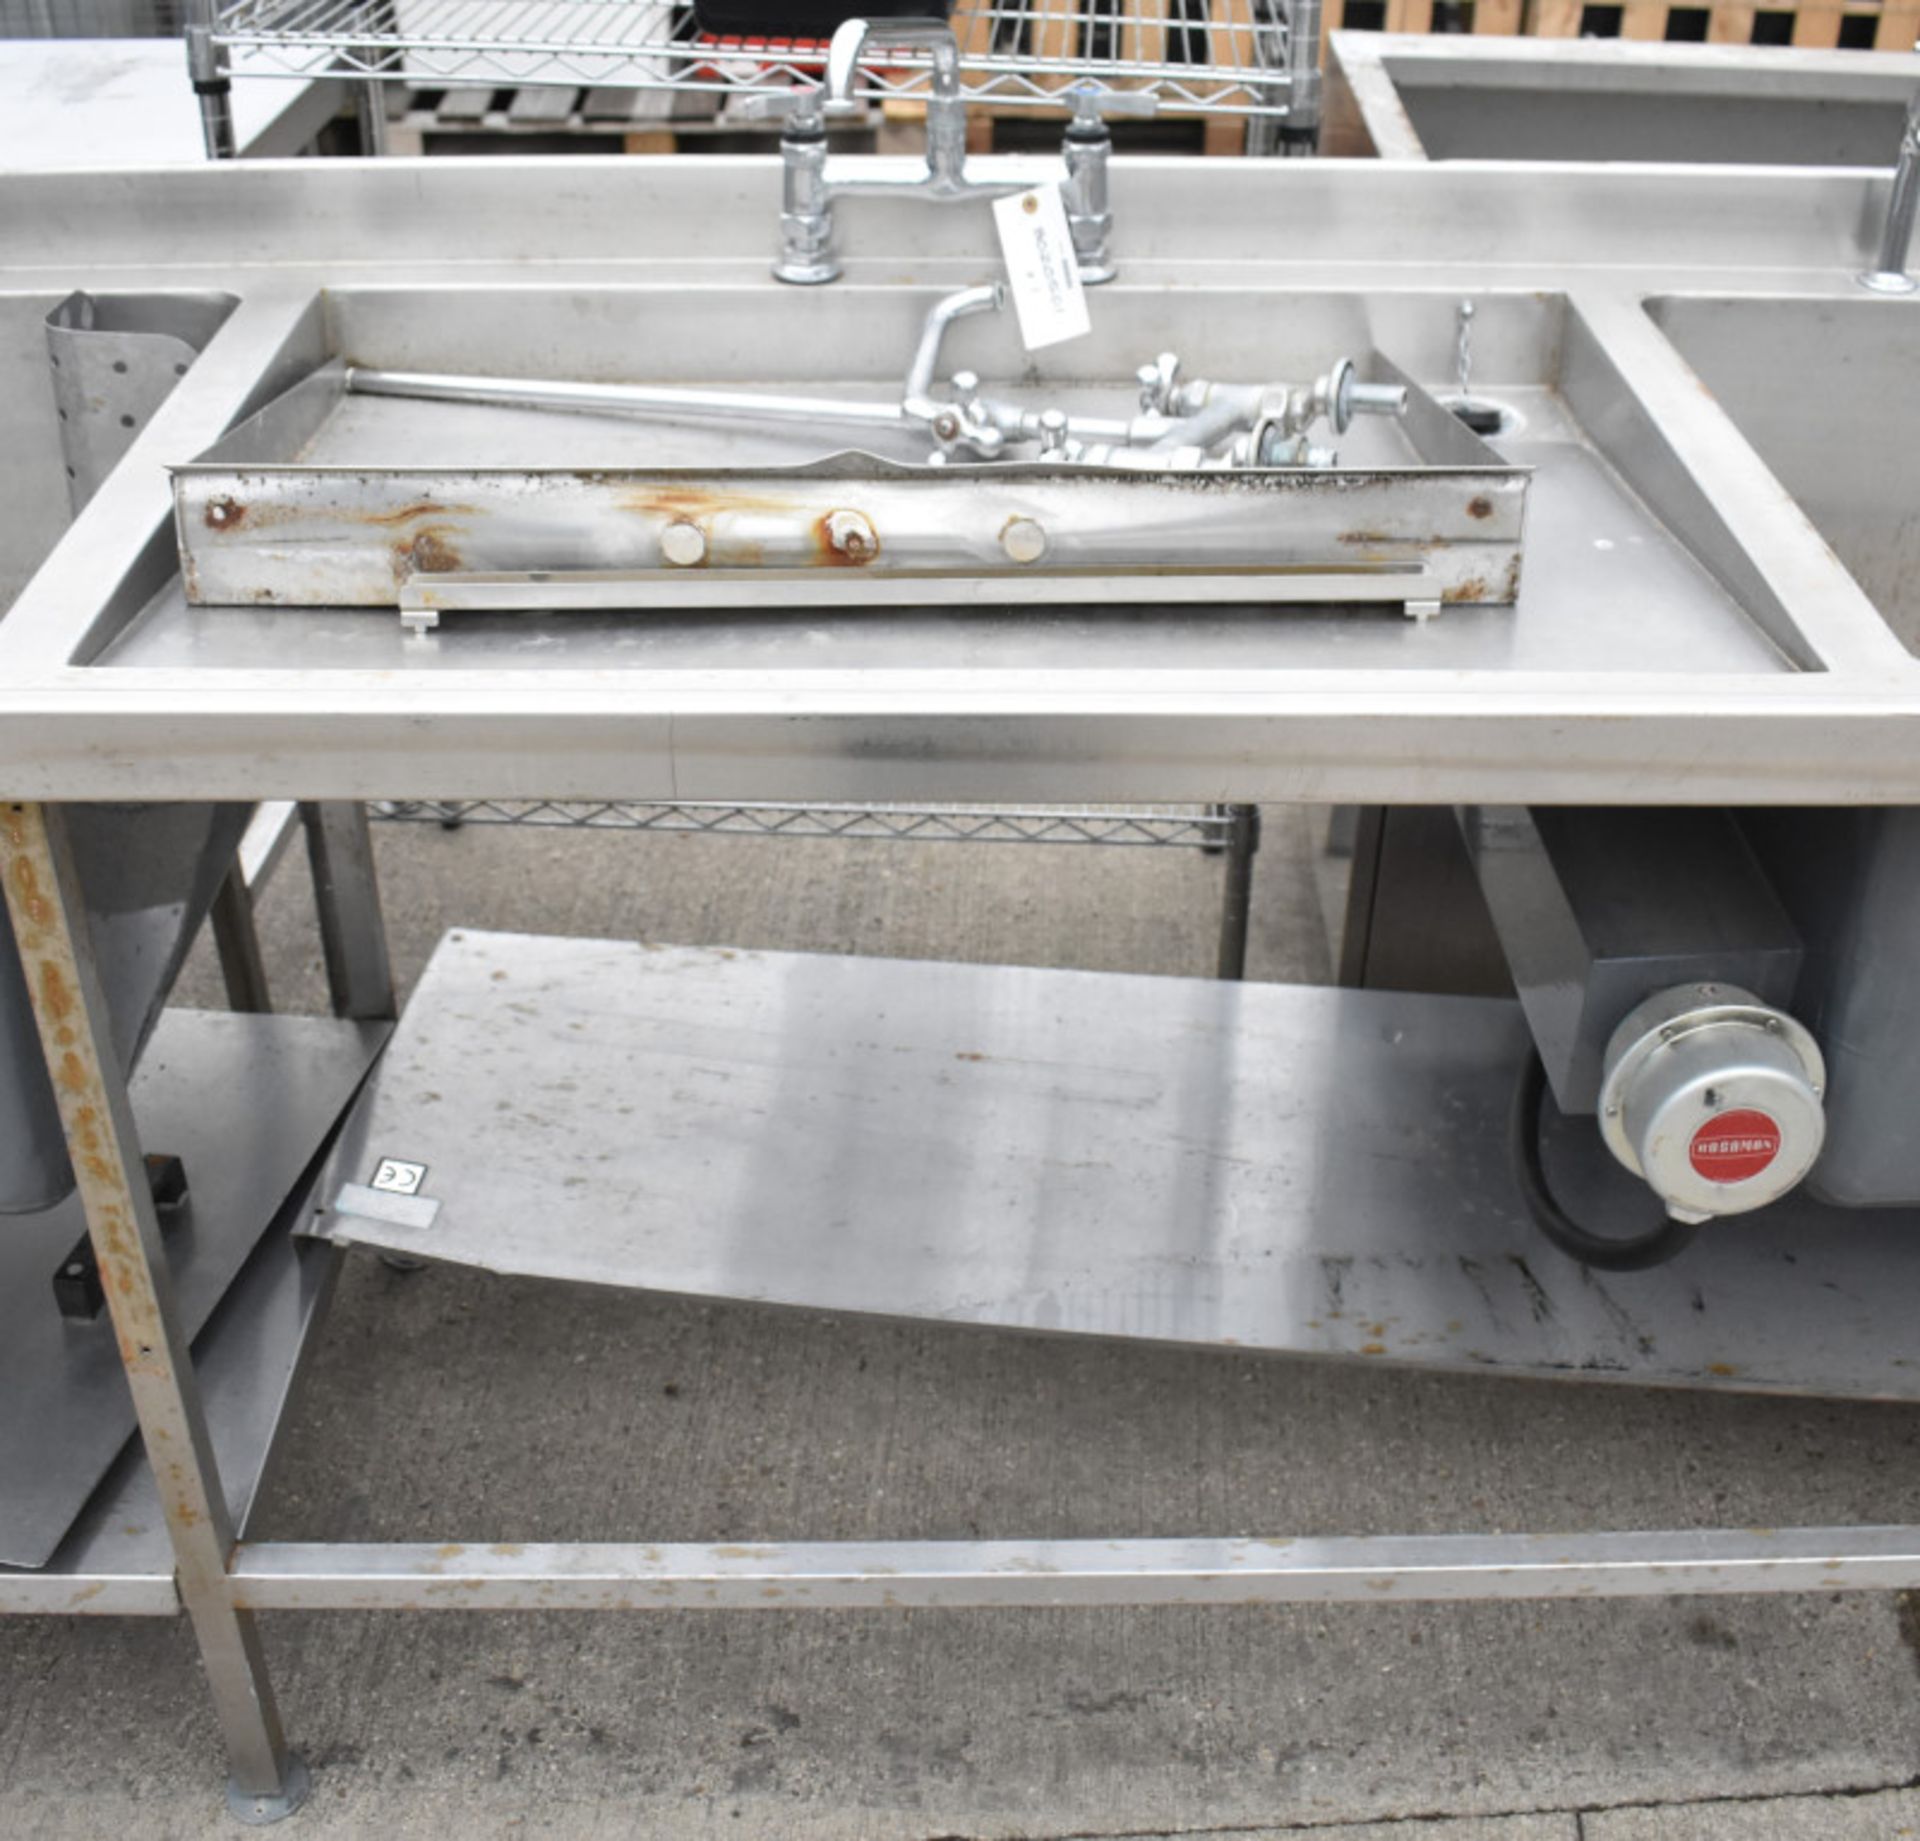 Stainless steel Double drainer Prep Sink Unit L 2700mm x D 750mm x H 950mm - Image 3 of 5